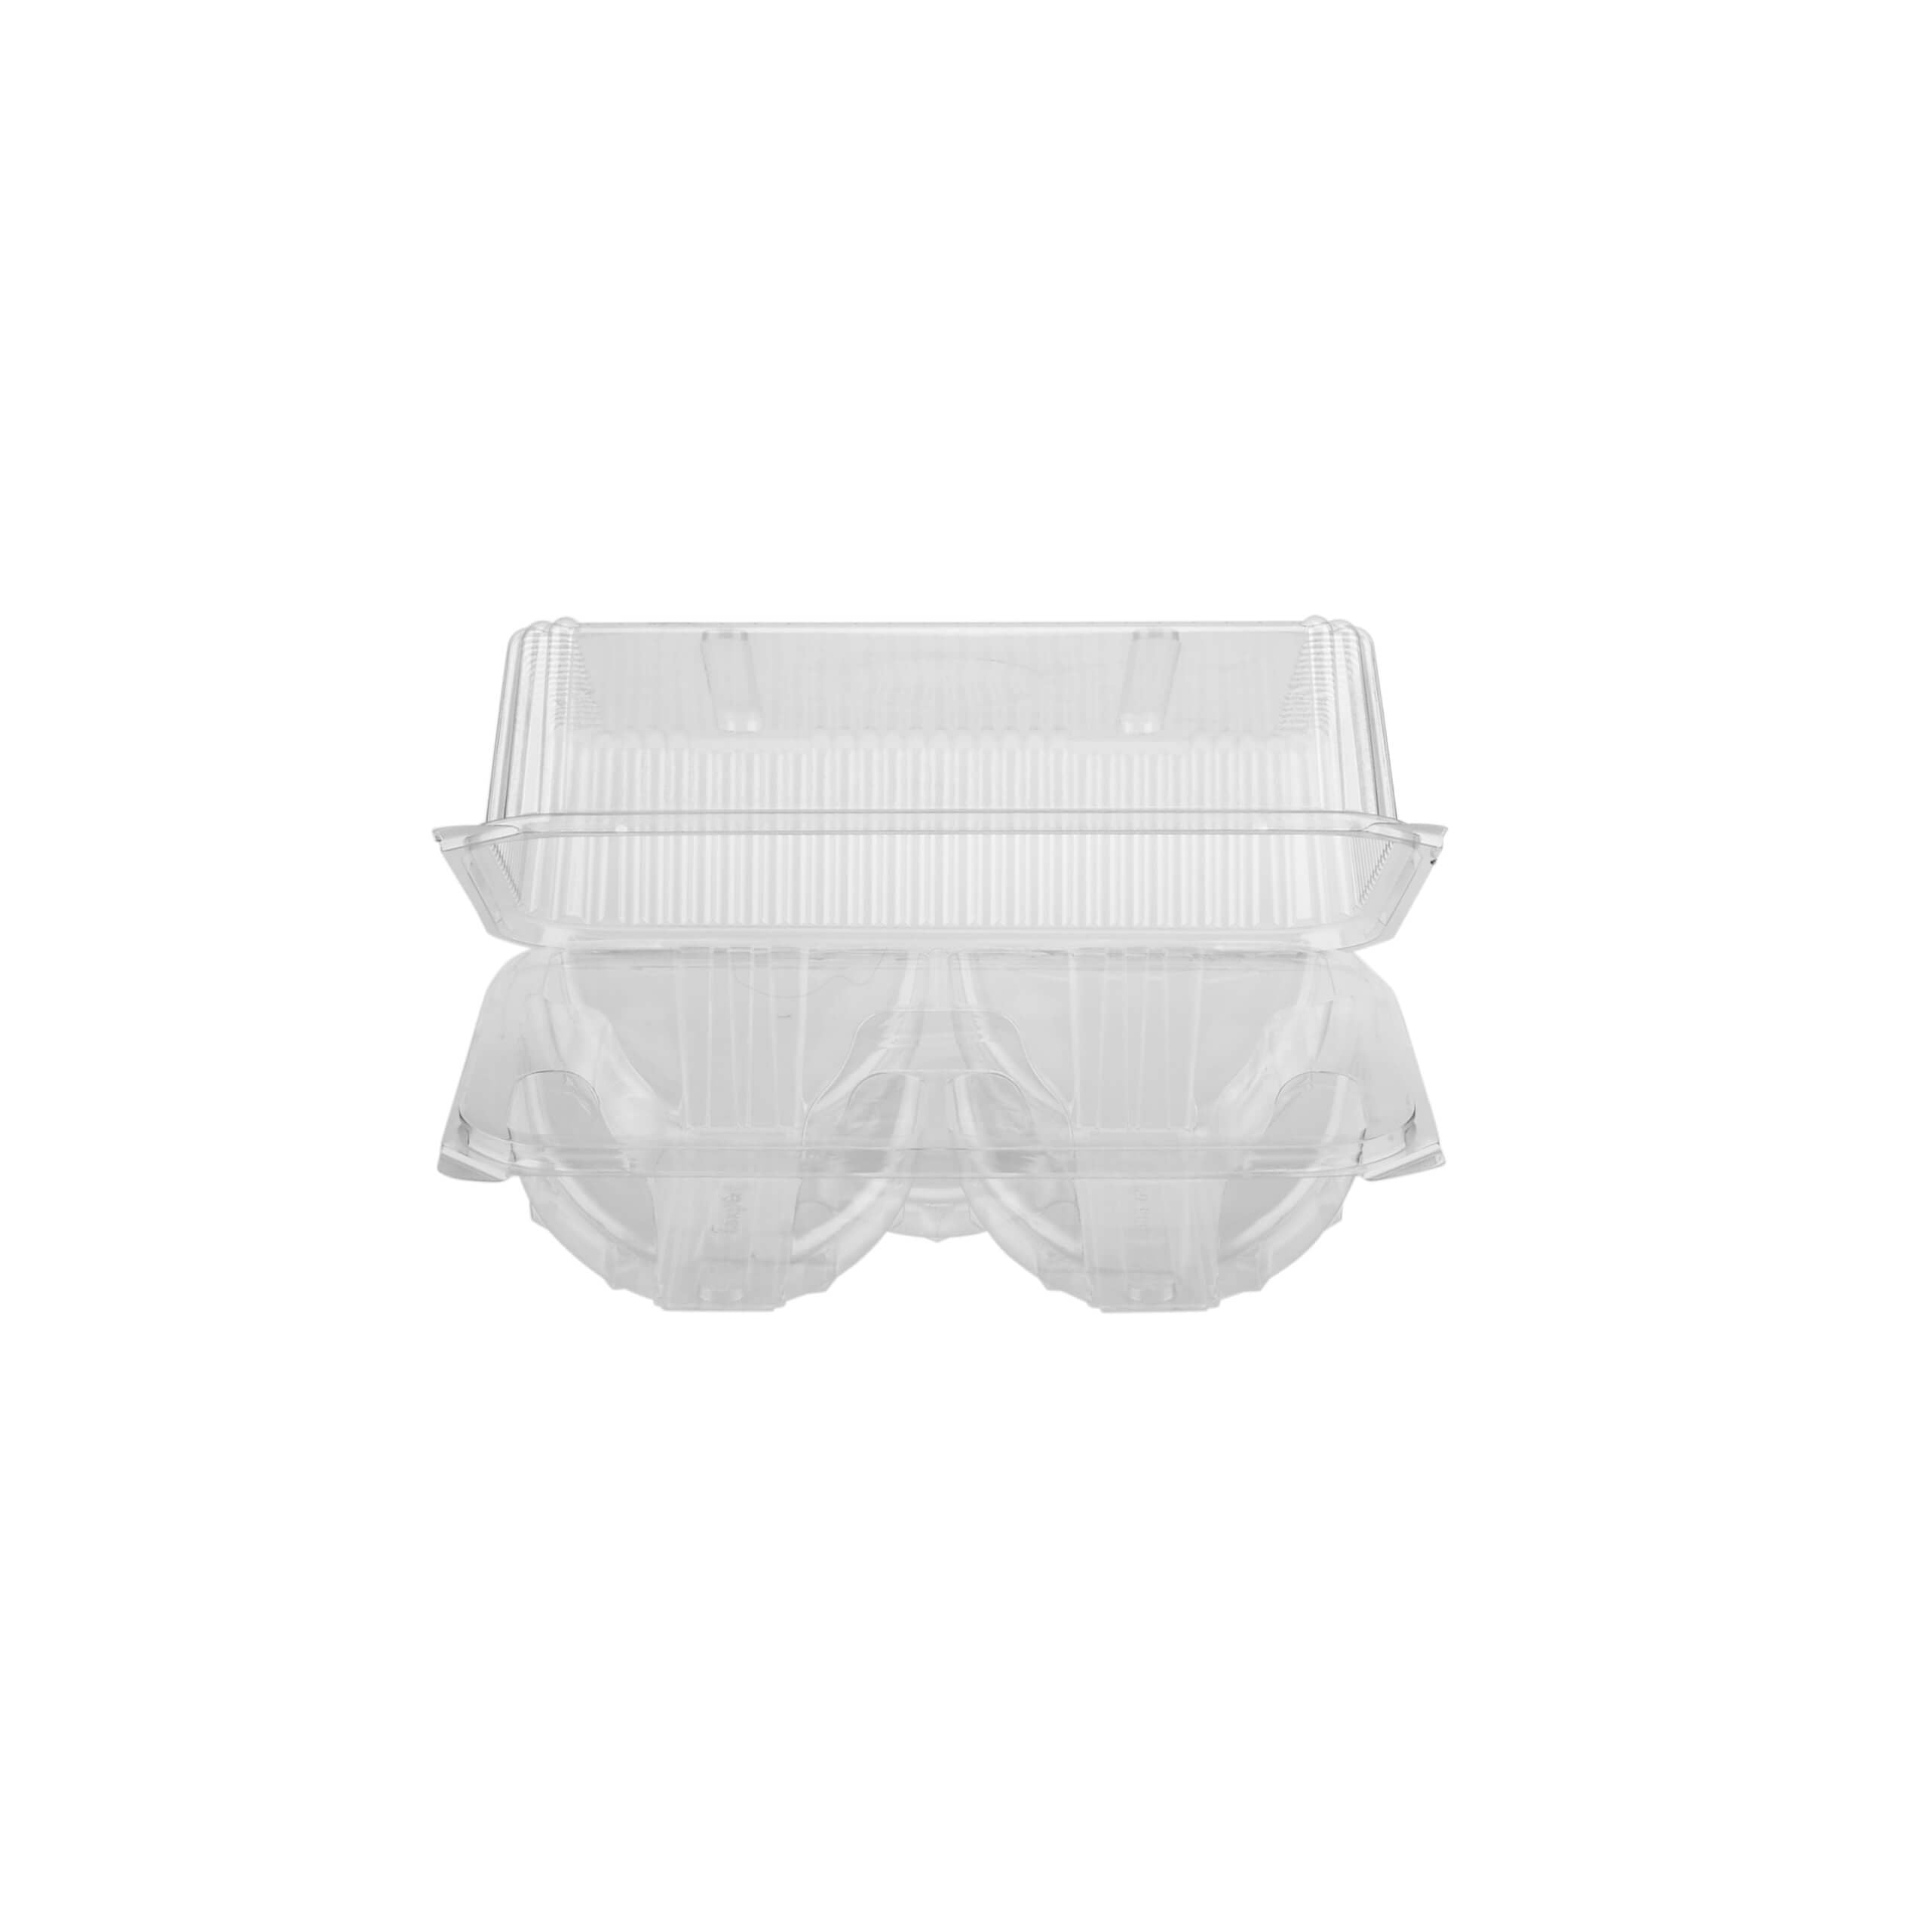 Clear Donut Clamshell container for 5 donuts - Hotpack Global